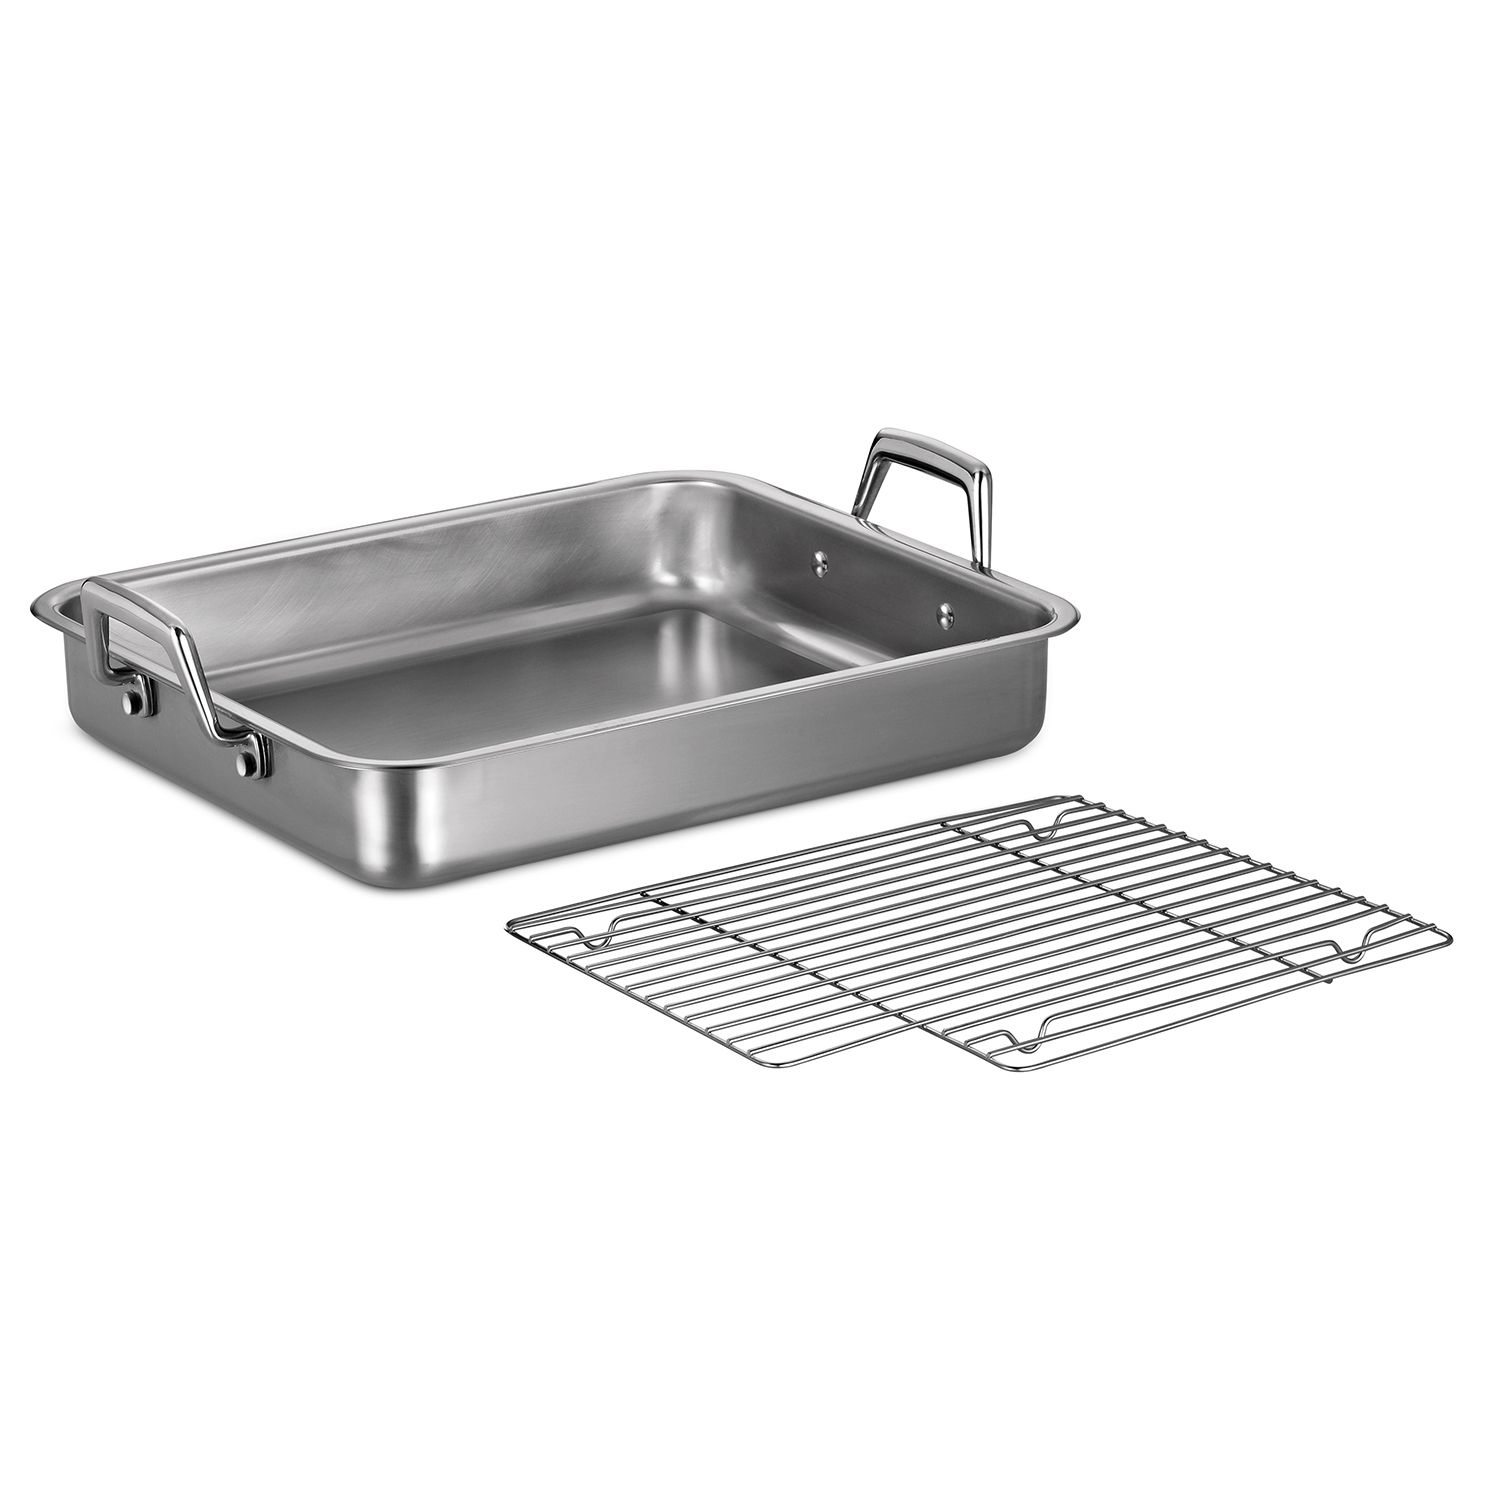 Walchoice Roasting Pan with Rack Set, Stainless Steel Large Turkey Roaster  with V-shaped rack & Cooling Rack for Christmas Thanksgiving, Heavy Duty 